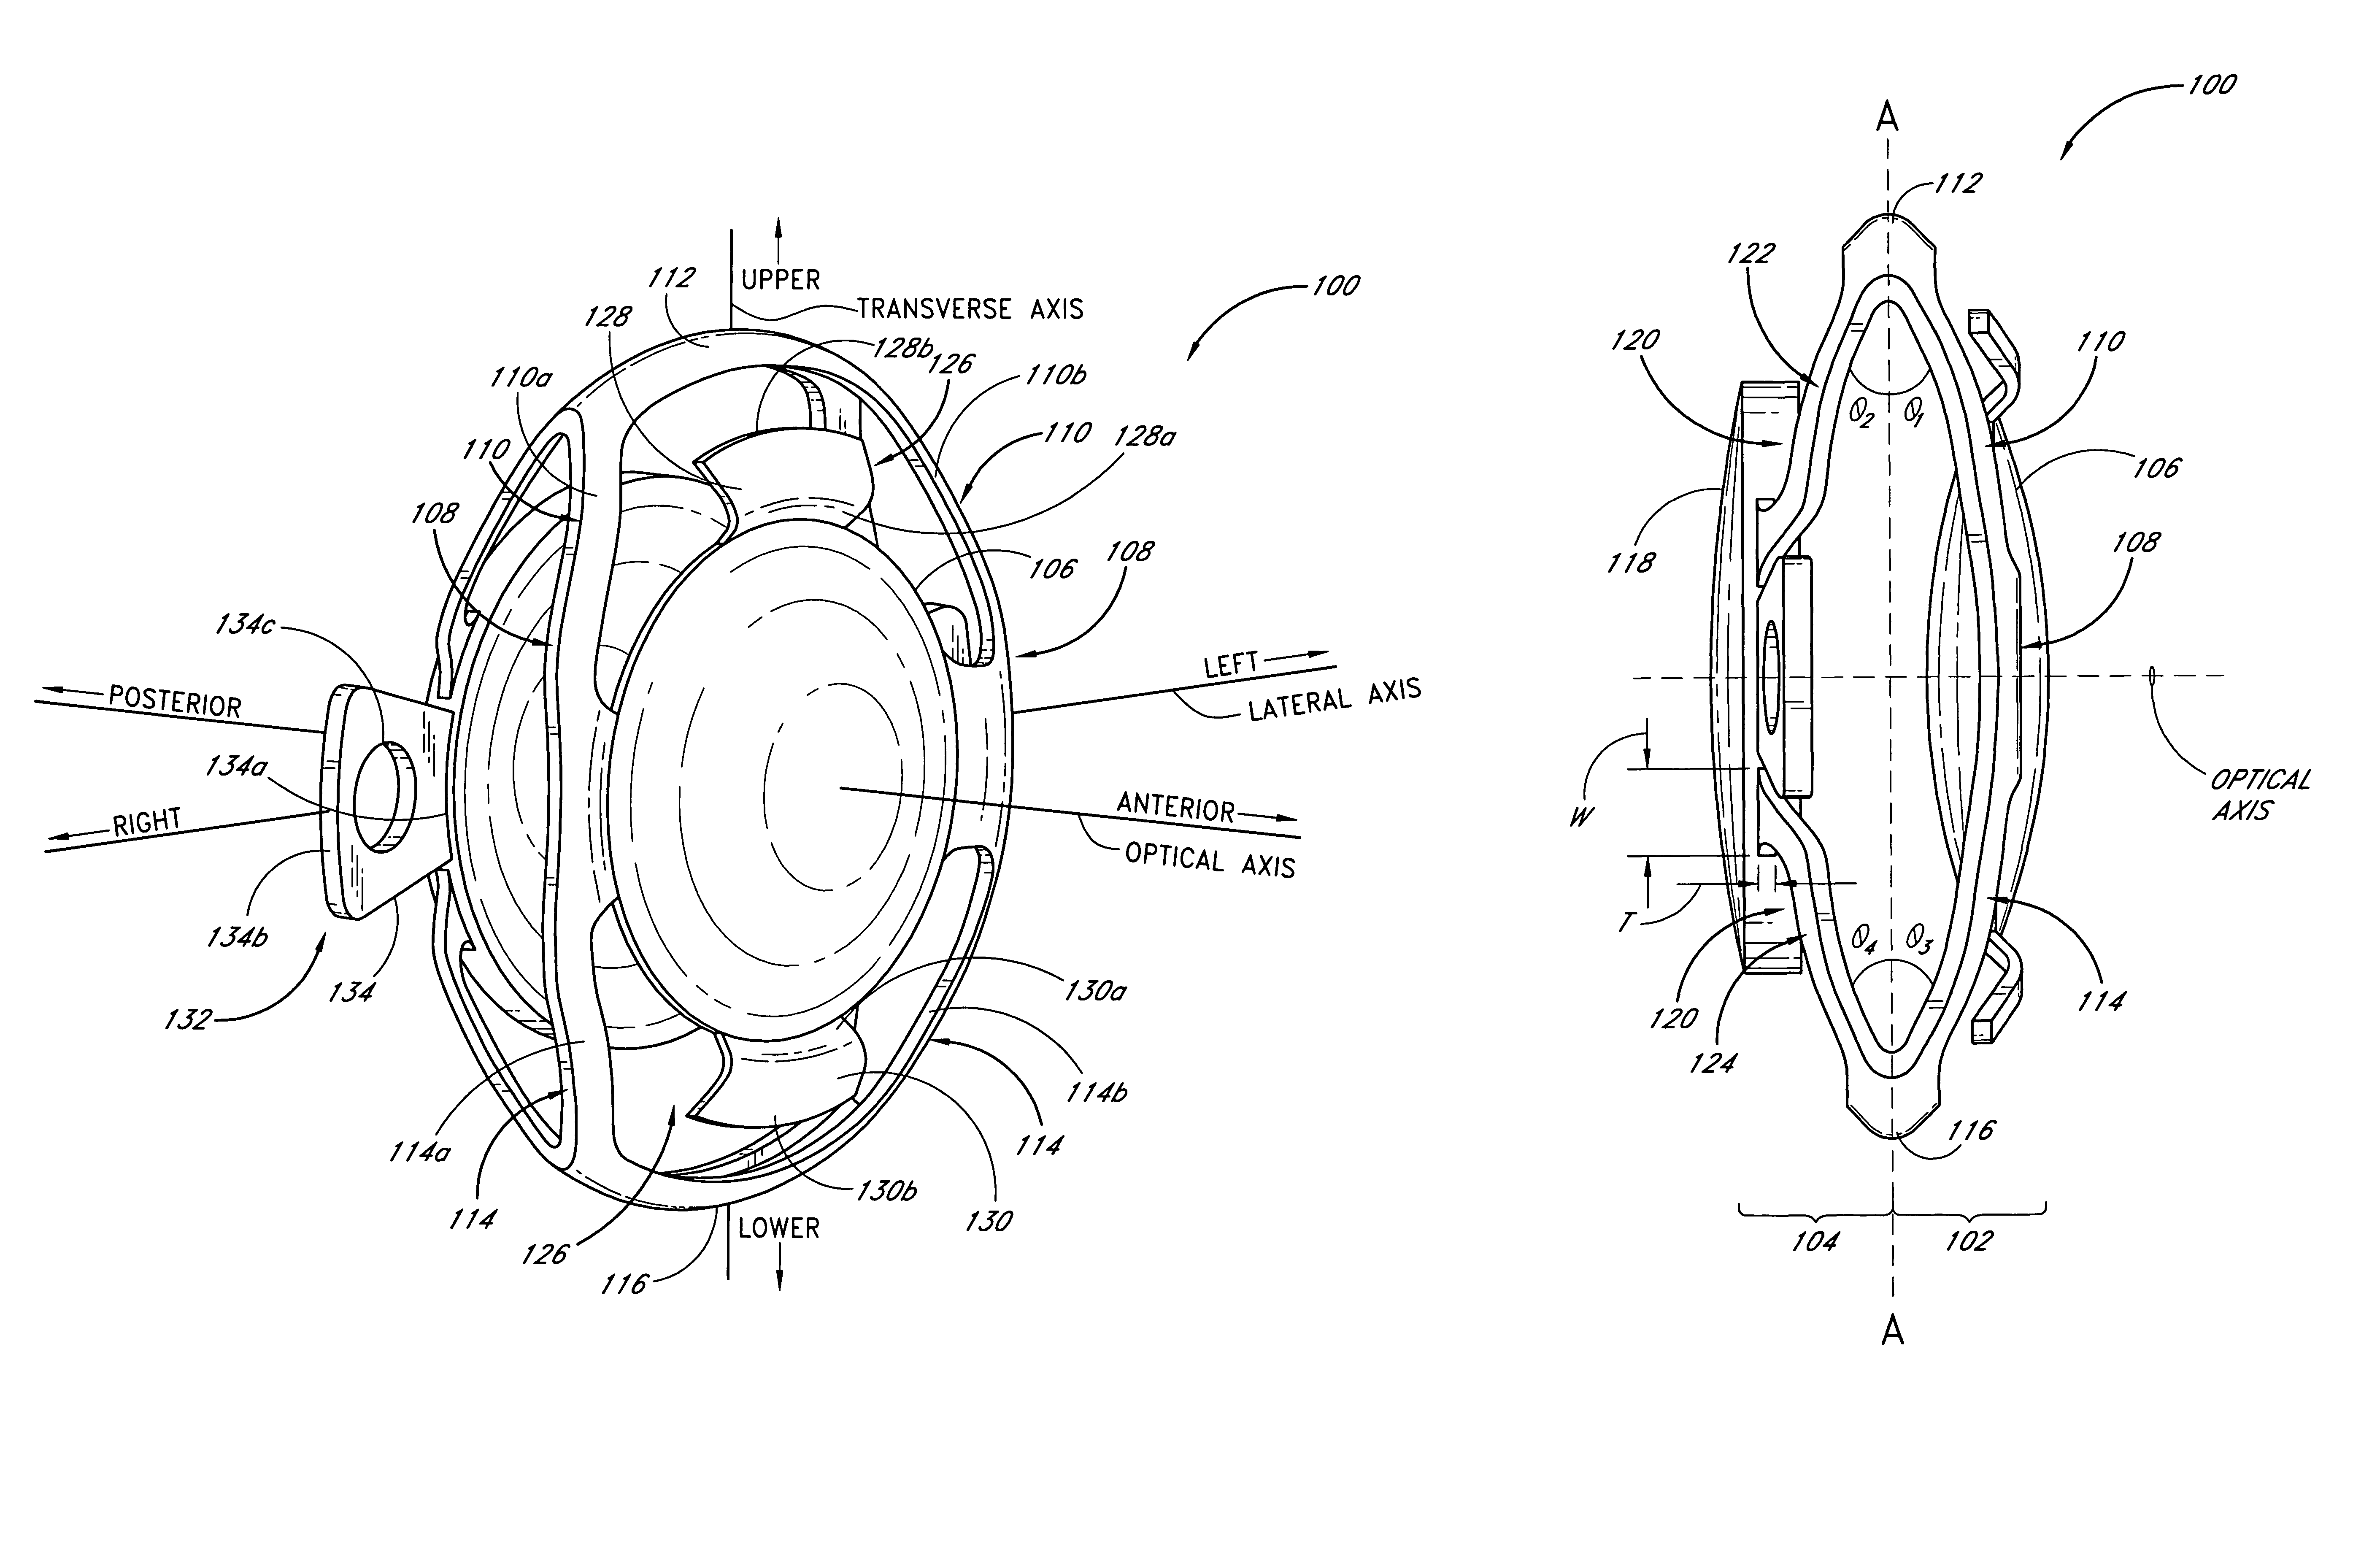 Materials for use in accommodating intraocular lens system